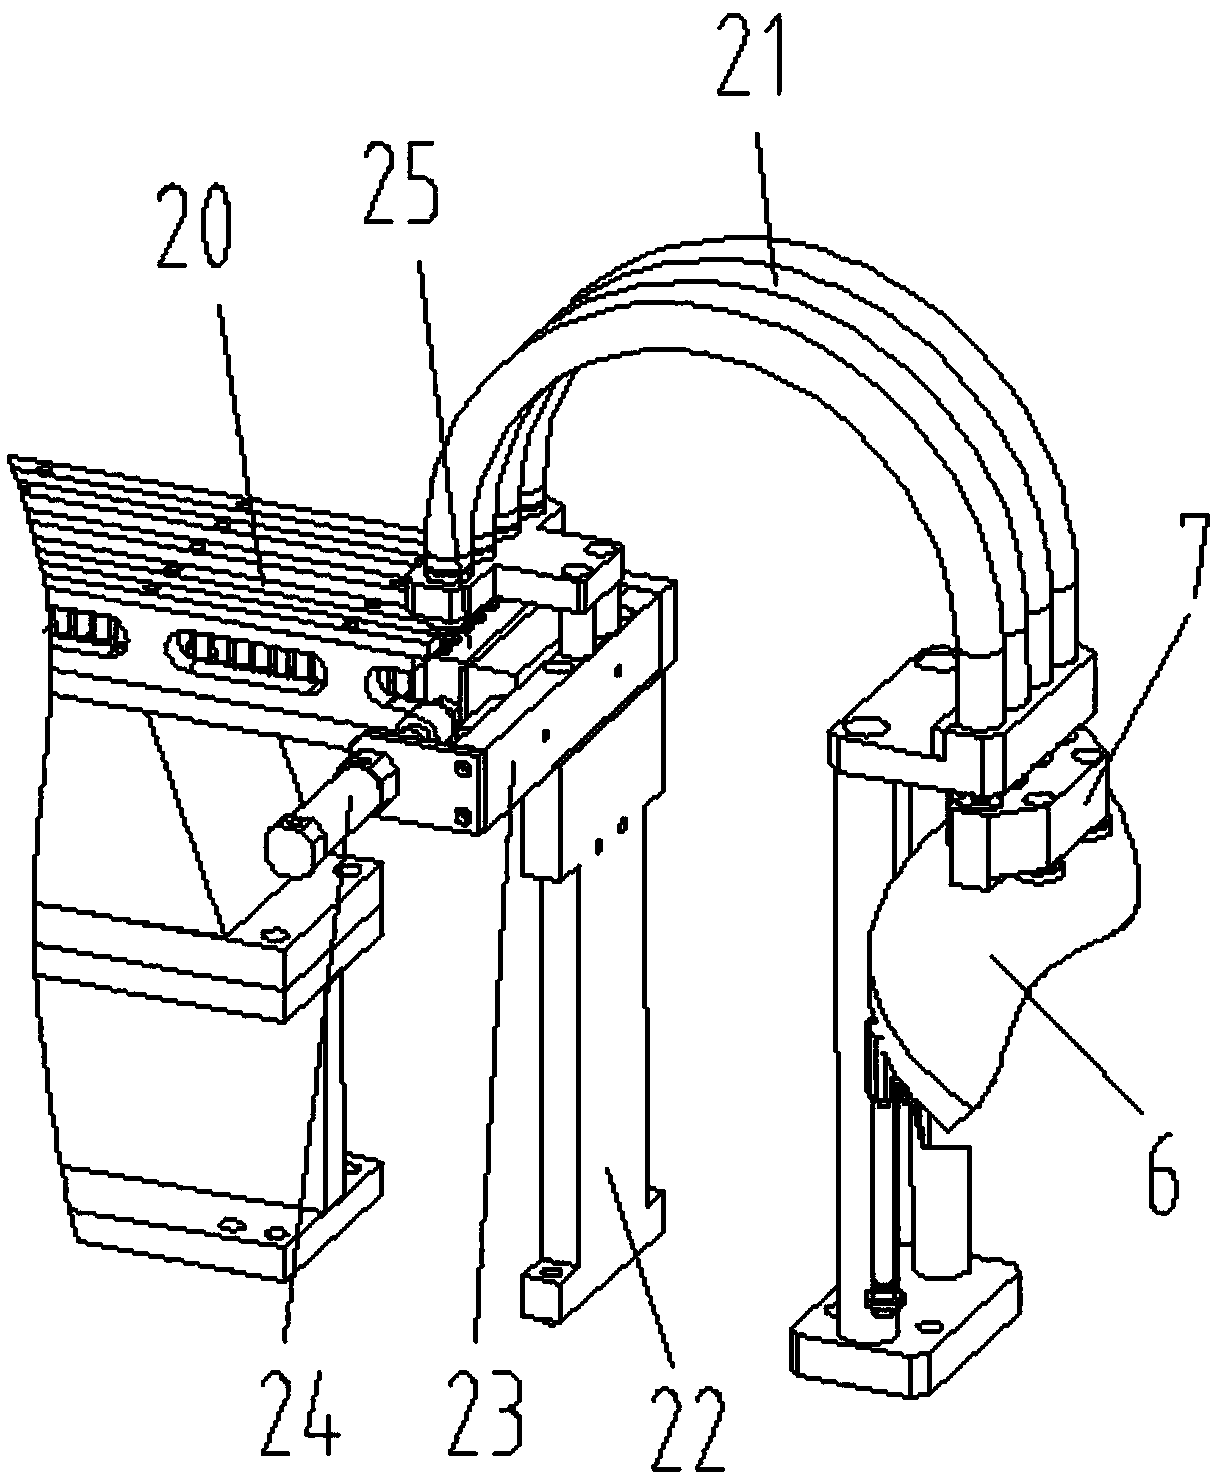 An integrated assembly machine for shampoo gland